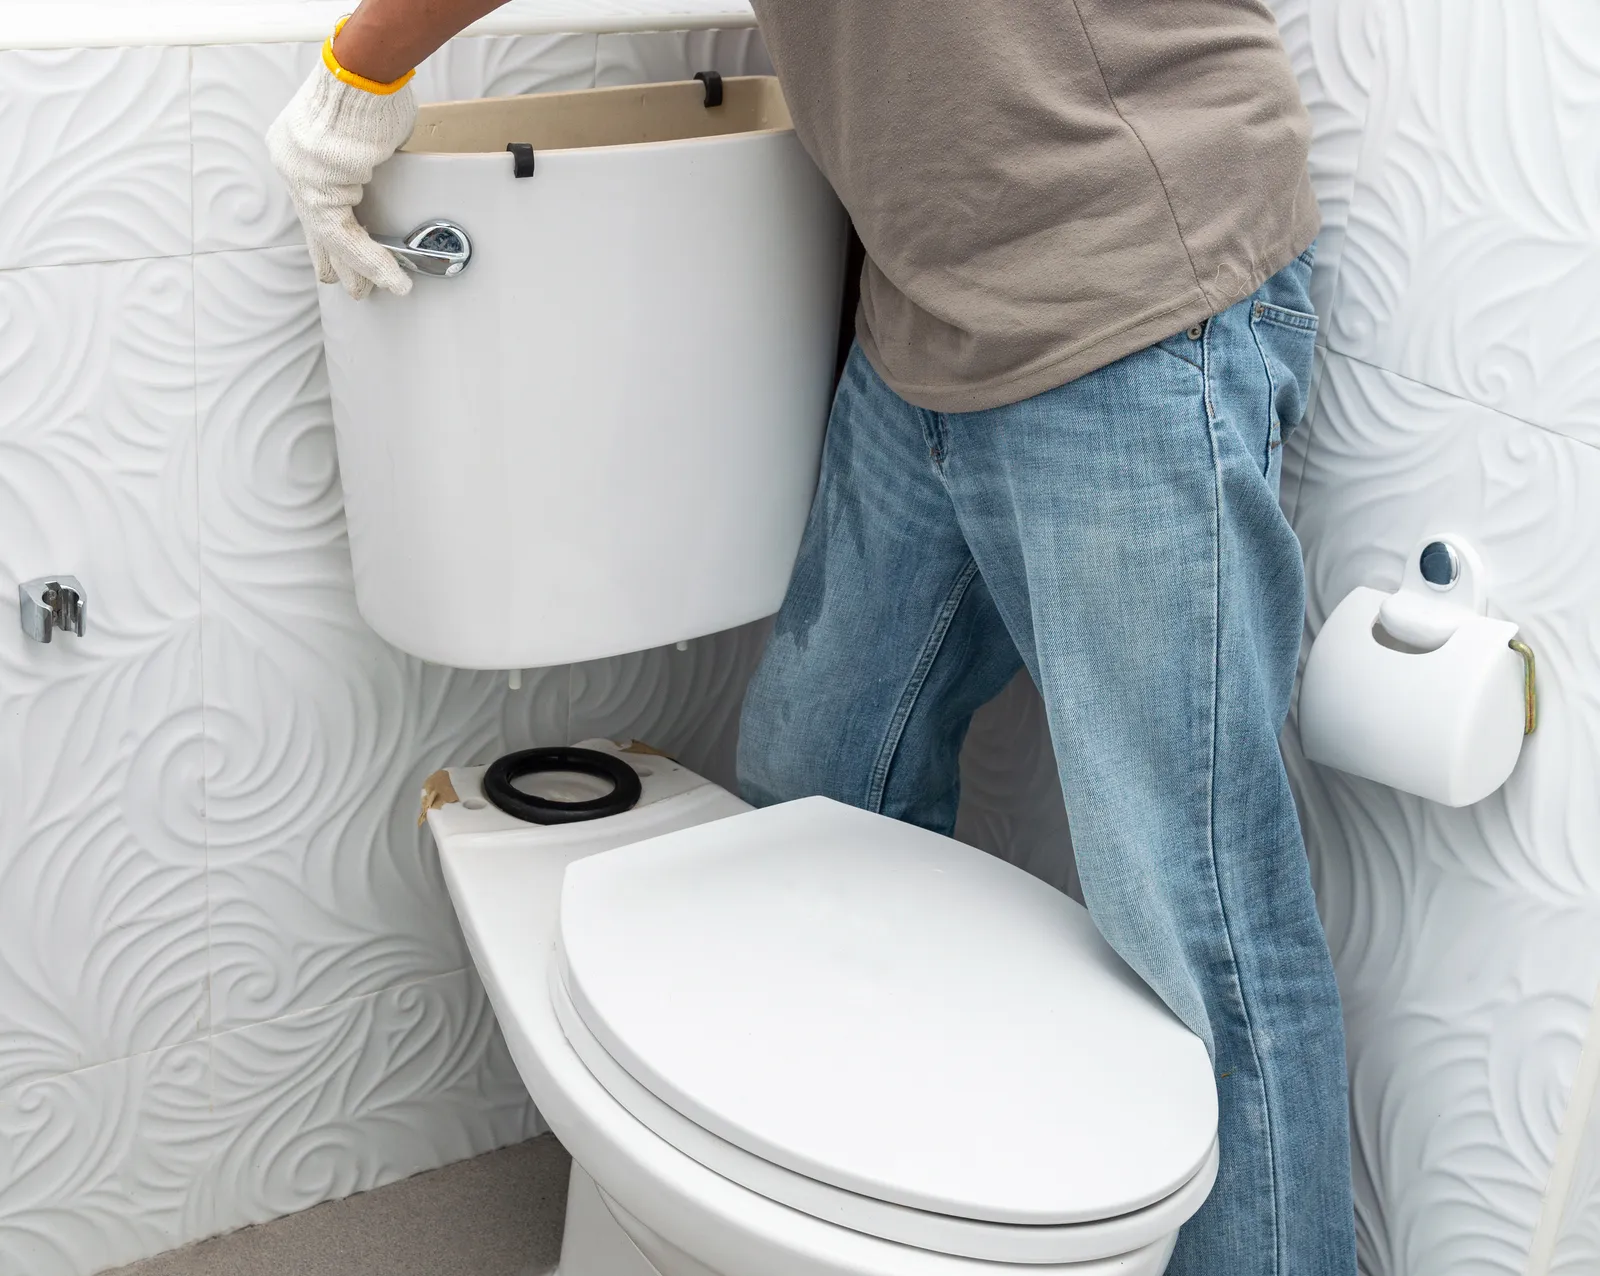 How To Attach Tank To Toilet Bowl